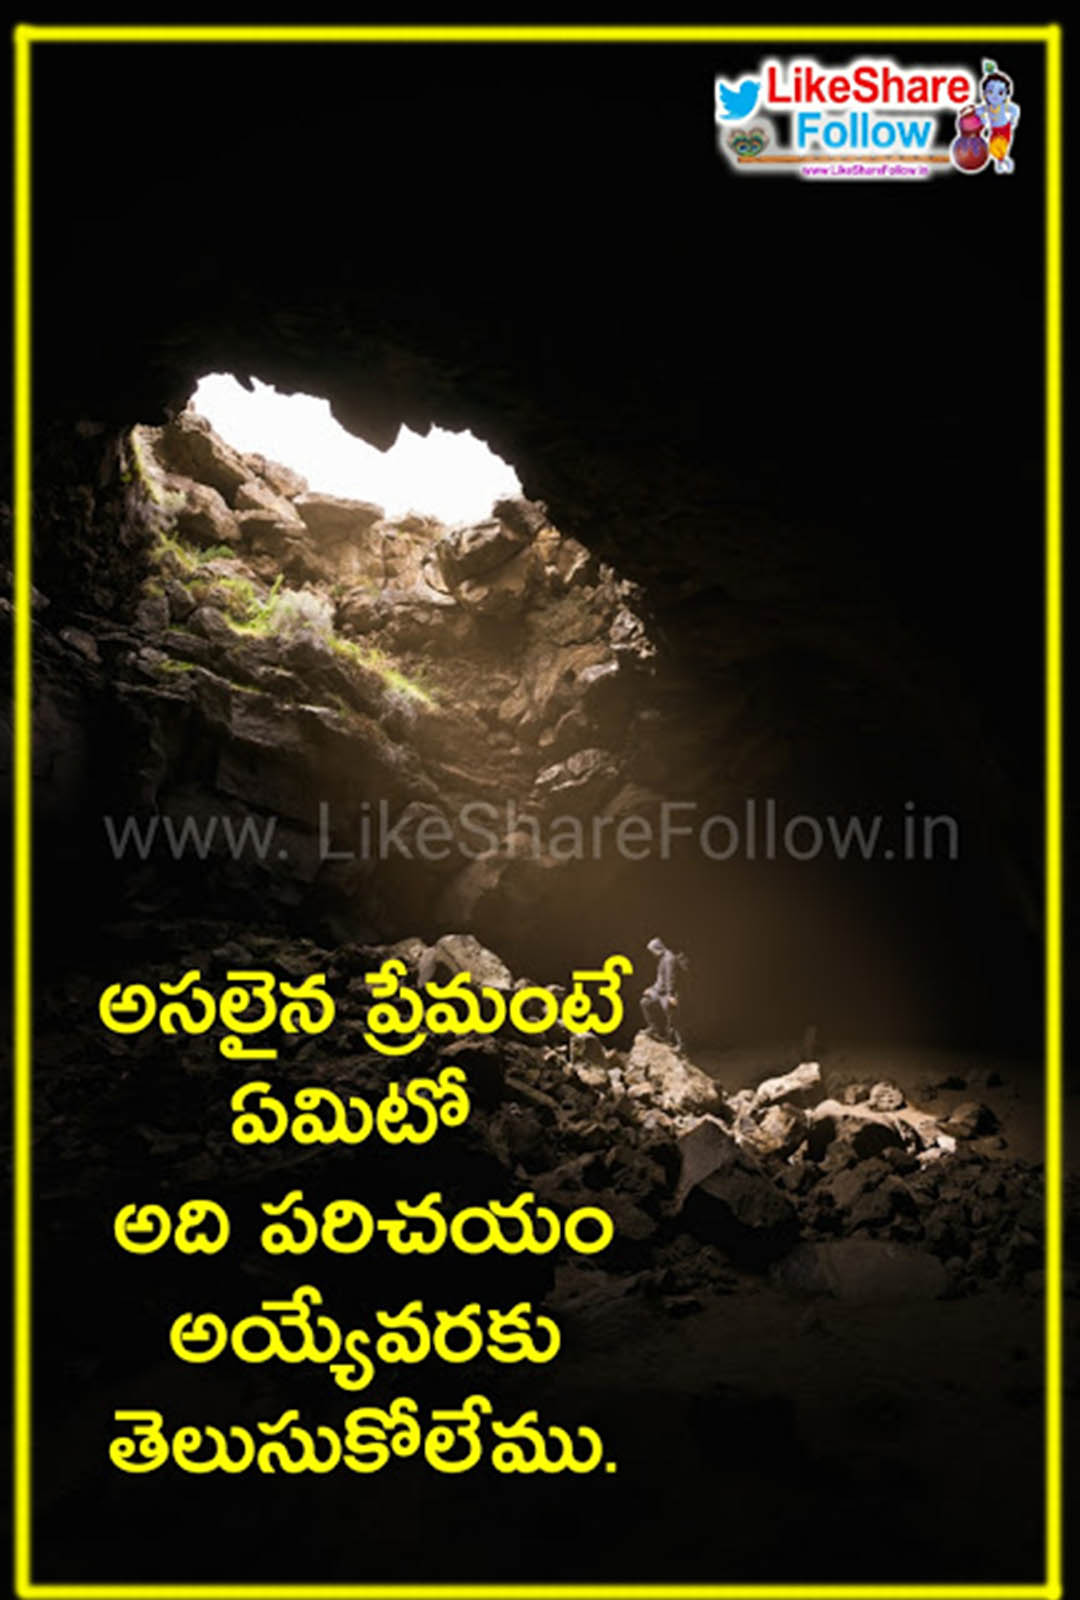 best telugu love quotes images 503 | Like Share Follow